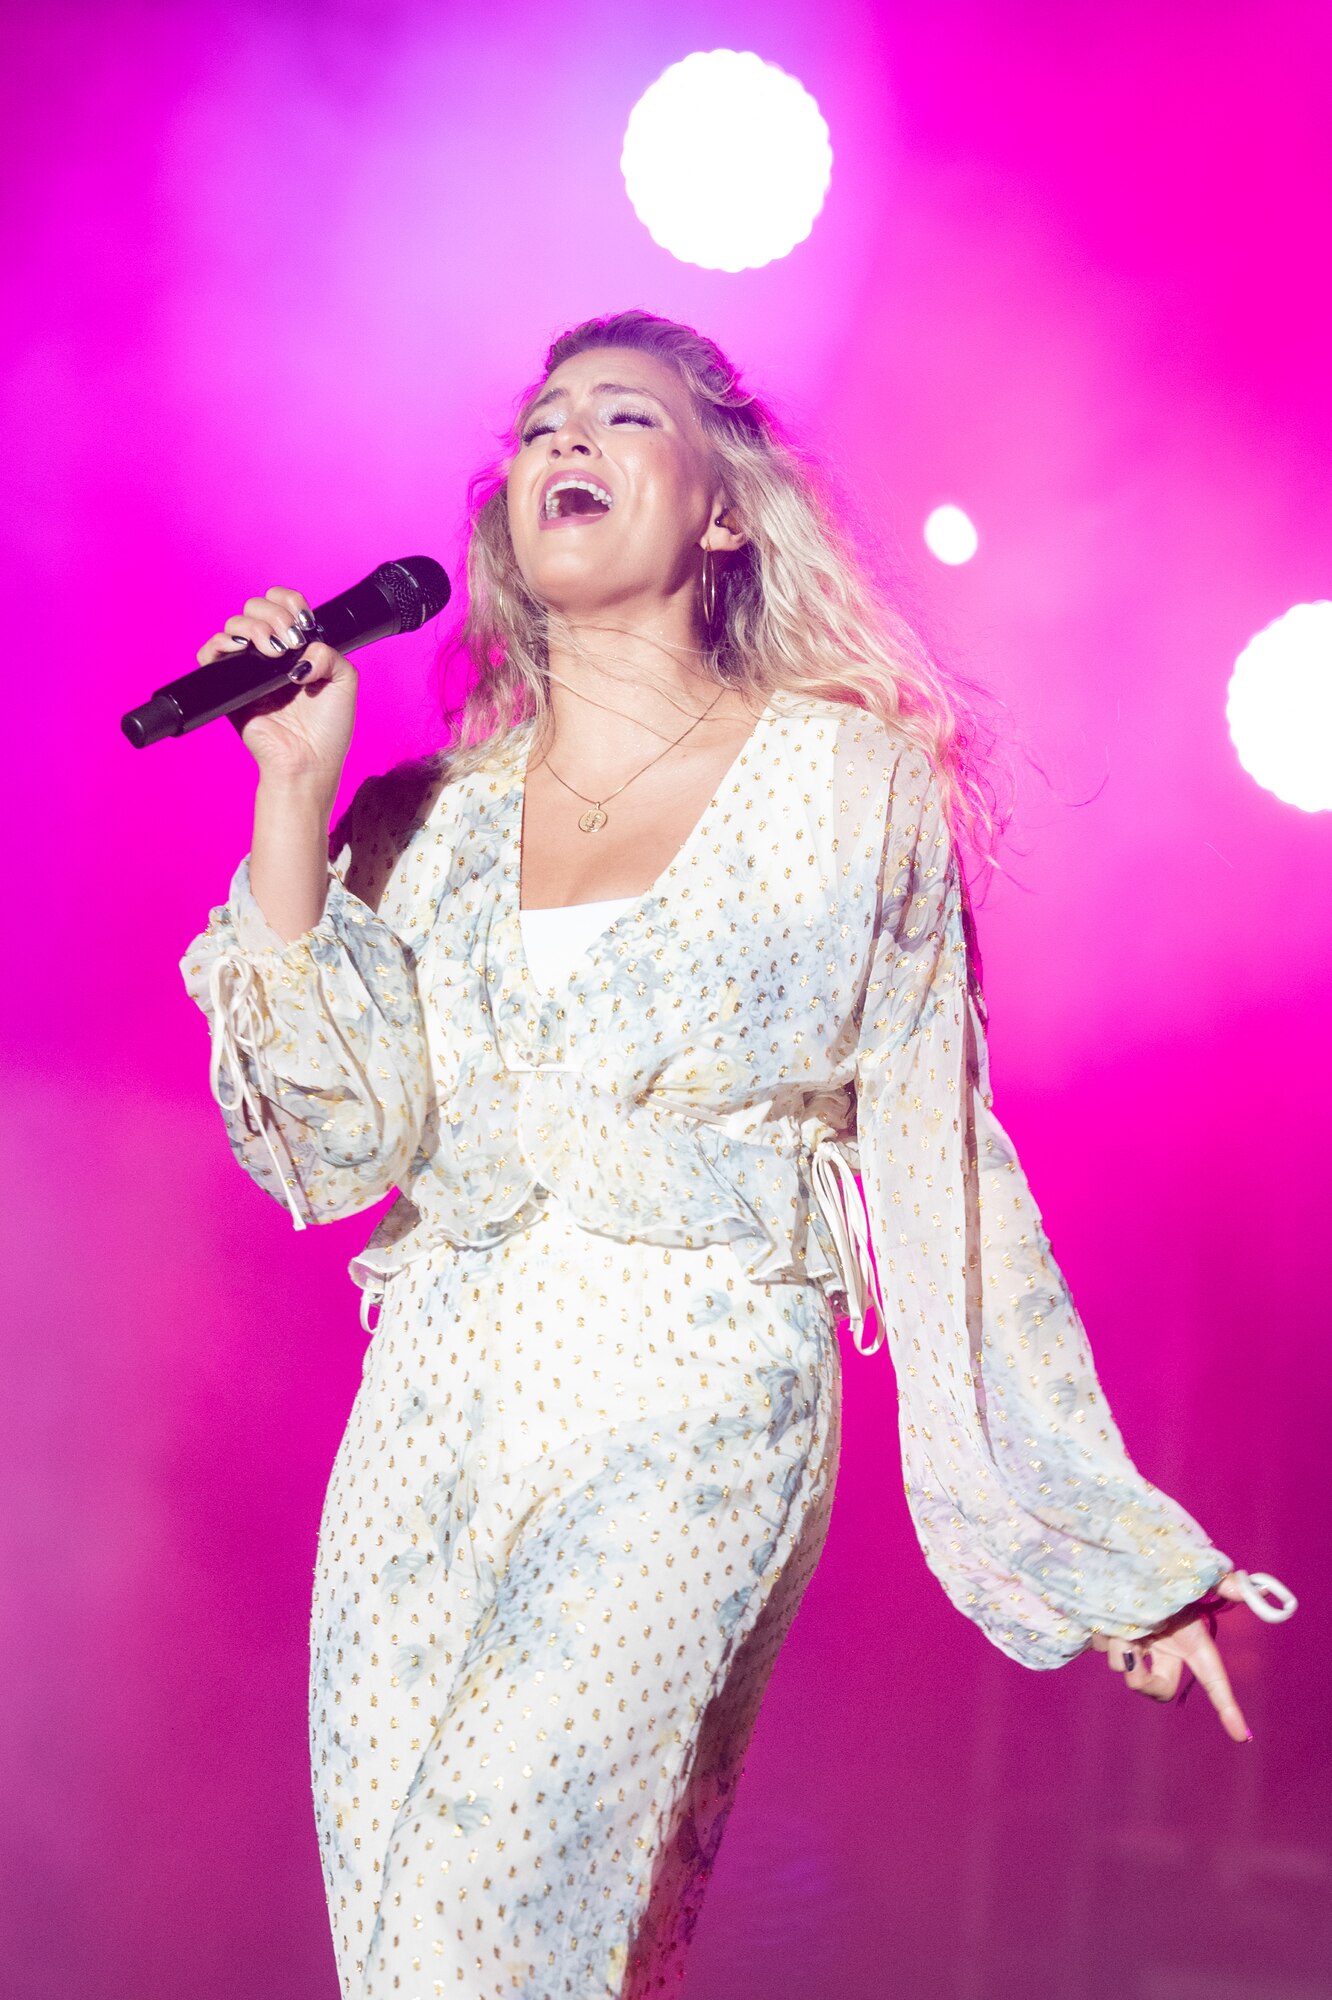 Gospel singer Tori Kelly performs before
a crowd of spectators at the End of
Summer Concert on Dover Air Force
Base, Delaware, Sept. 10, 2021. The
concert also featured hip-hop artist
Lecrae and was the base’s first open air
concert since 2018. (U.S. Air Force photo
by Mauricio Campino)